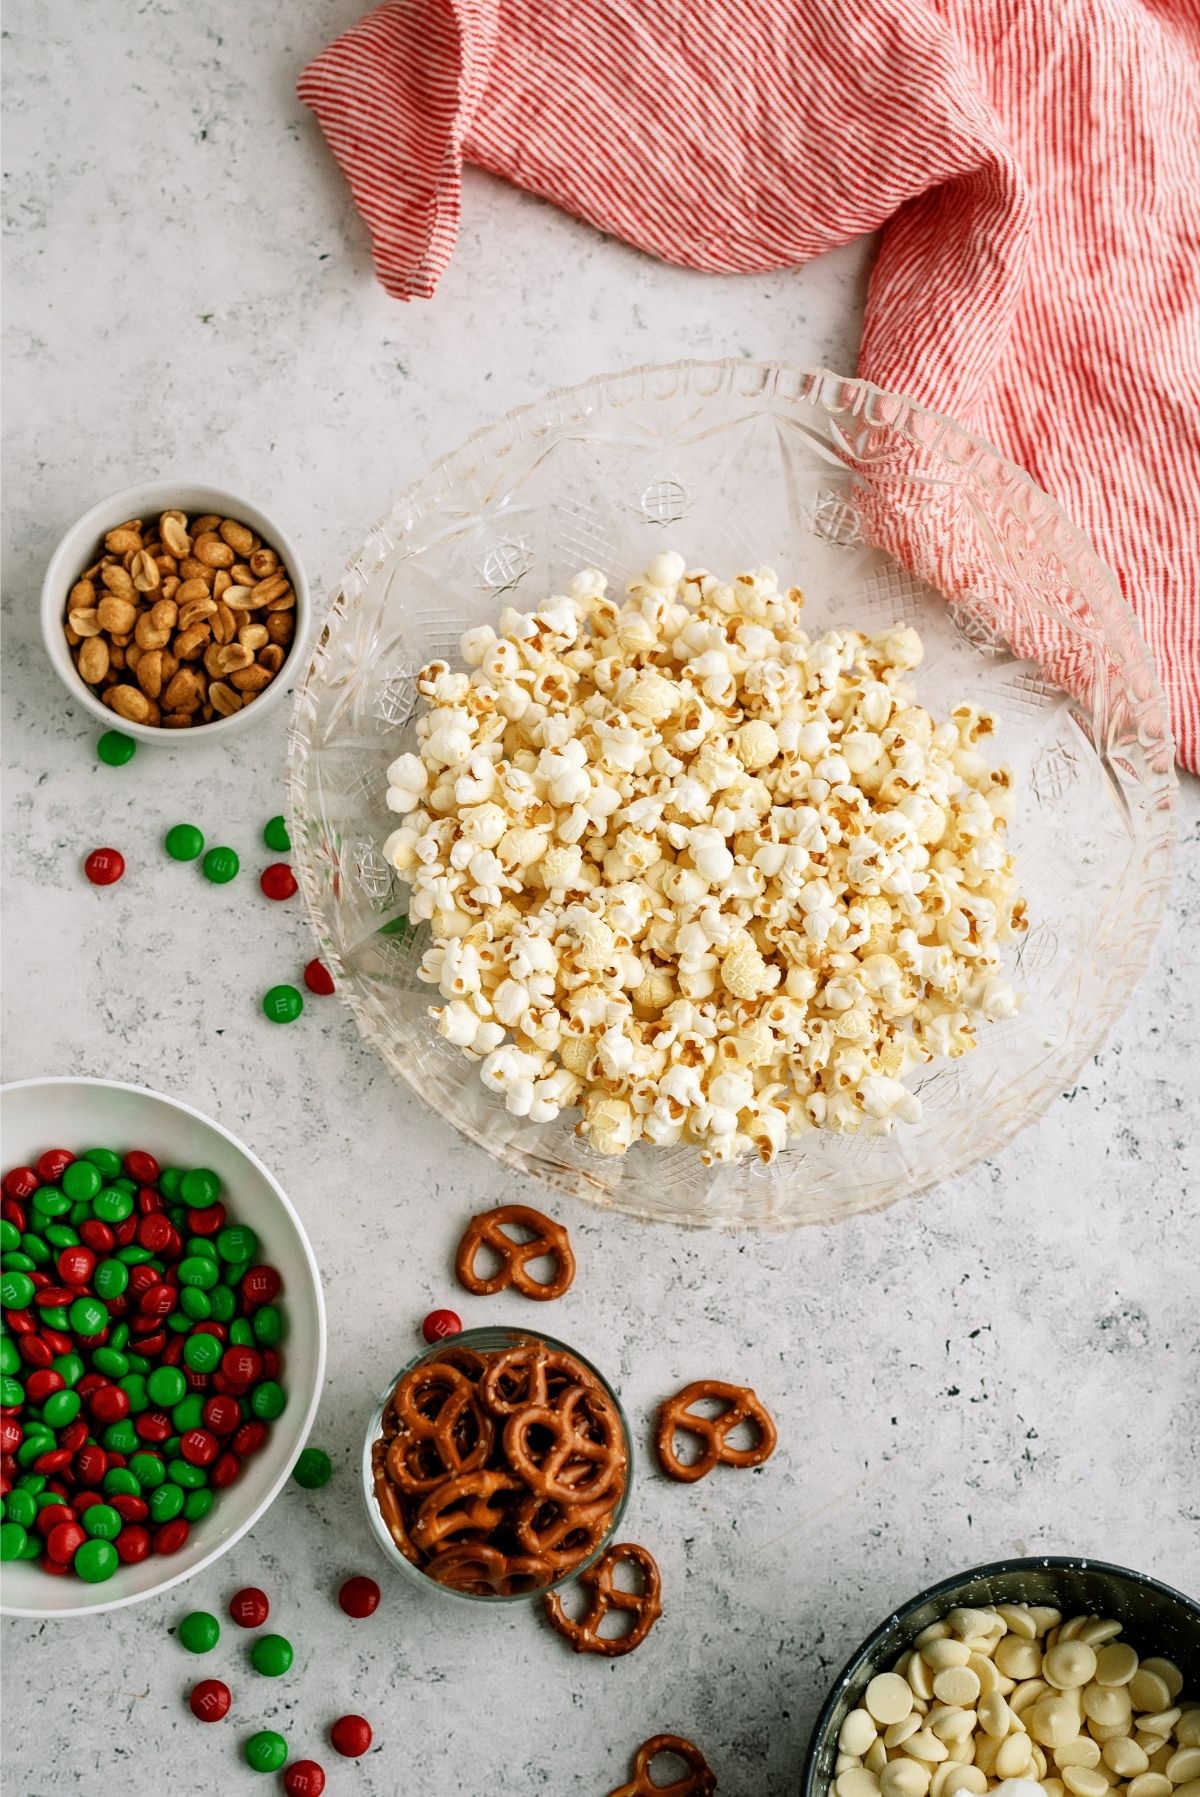 Ingredients for Sweet and Salty White Chocolate Popcorn